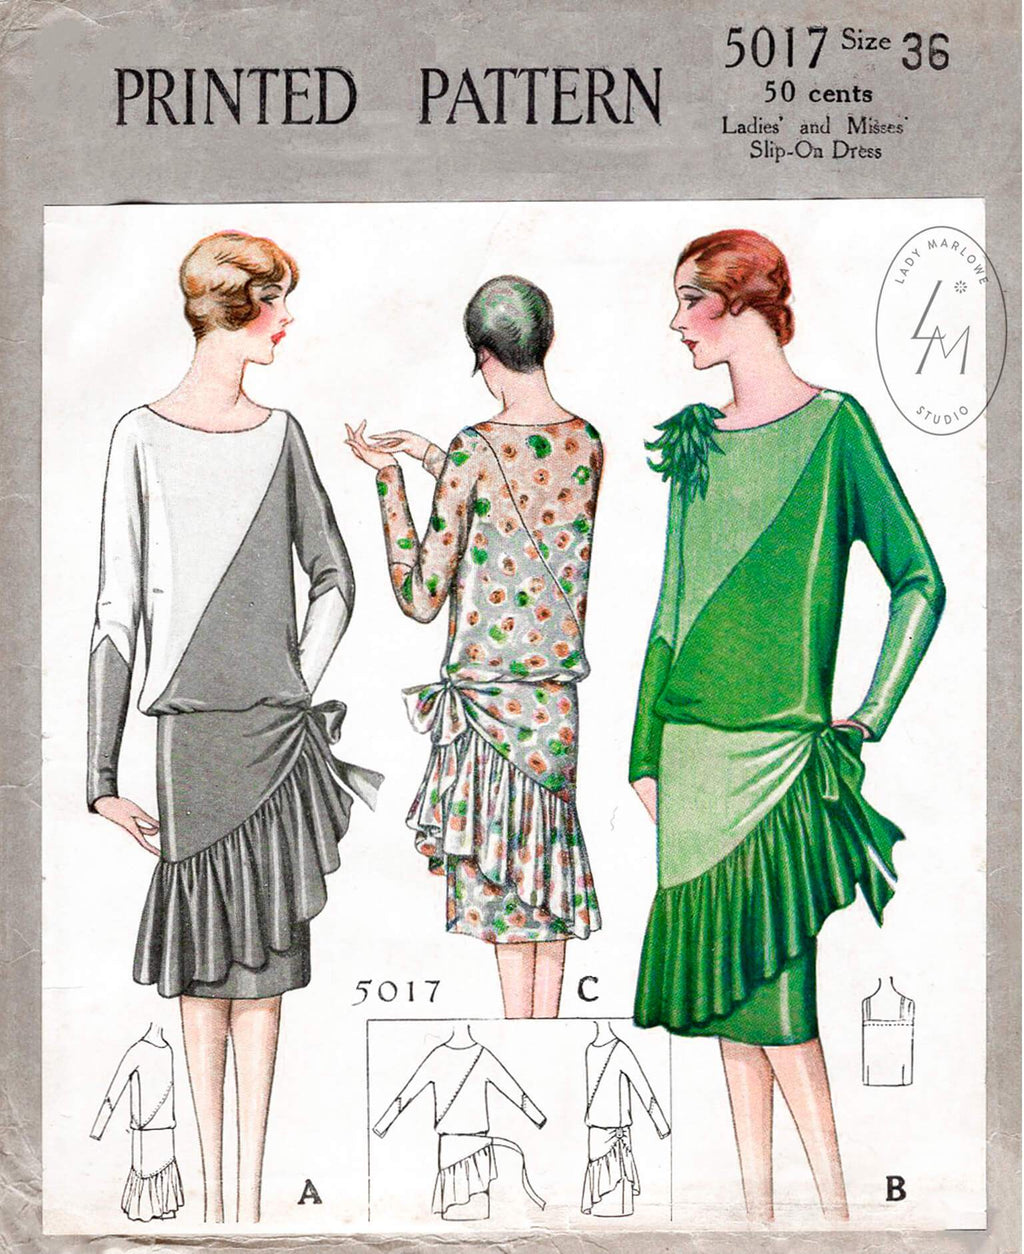 McCall 5017 1920s 1927 flapper dress ruffle skirt vintage sewing pattern reproduction